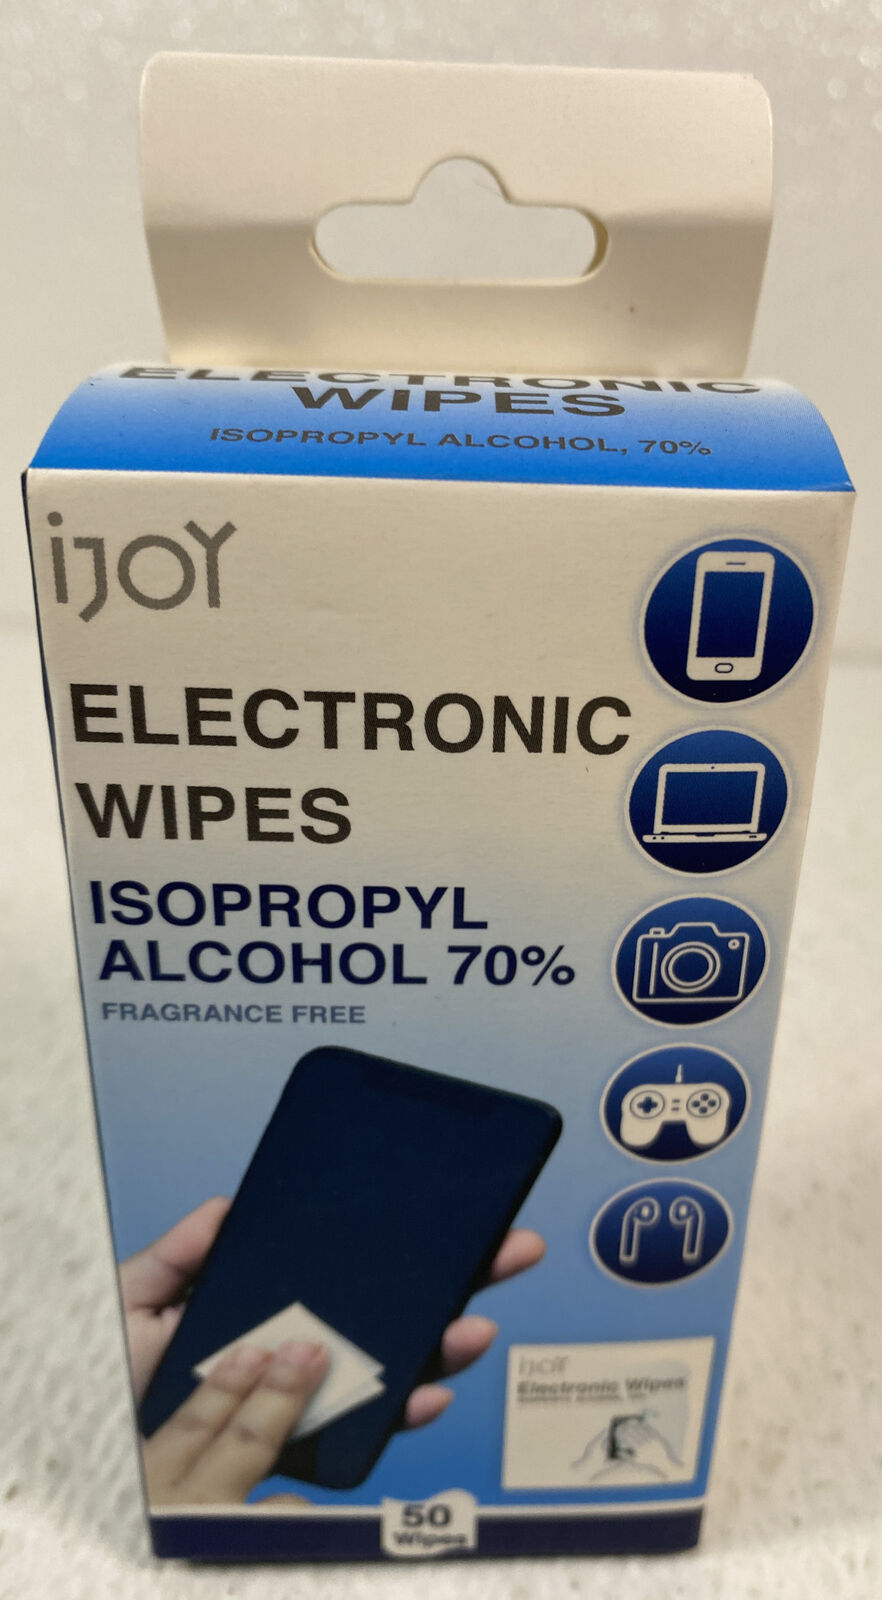 iJoy Isopropyl Alcohol 70% Electronic Wipes, 50 count